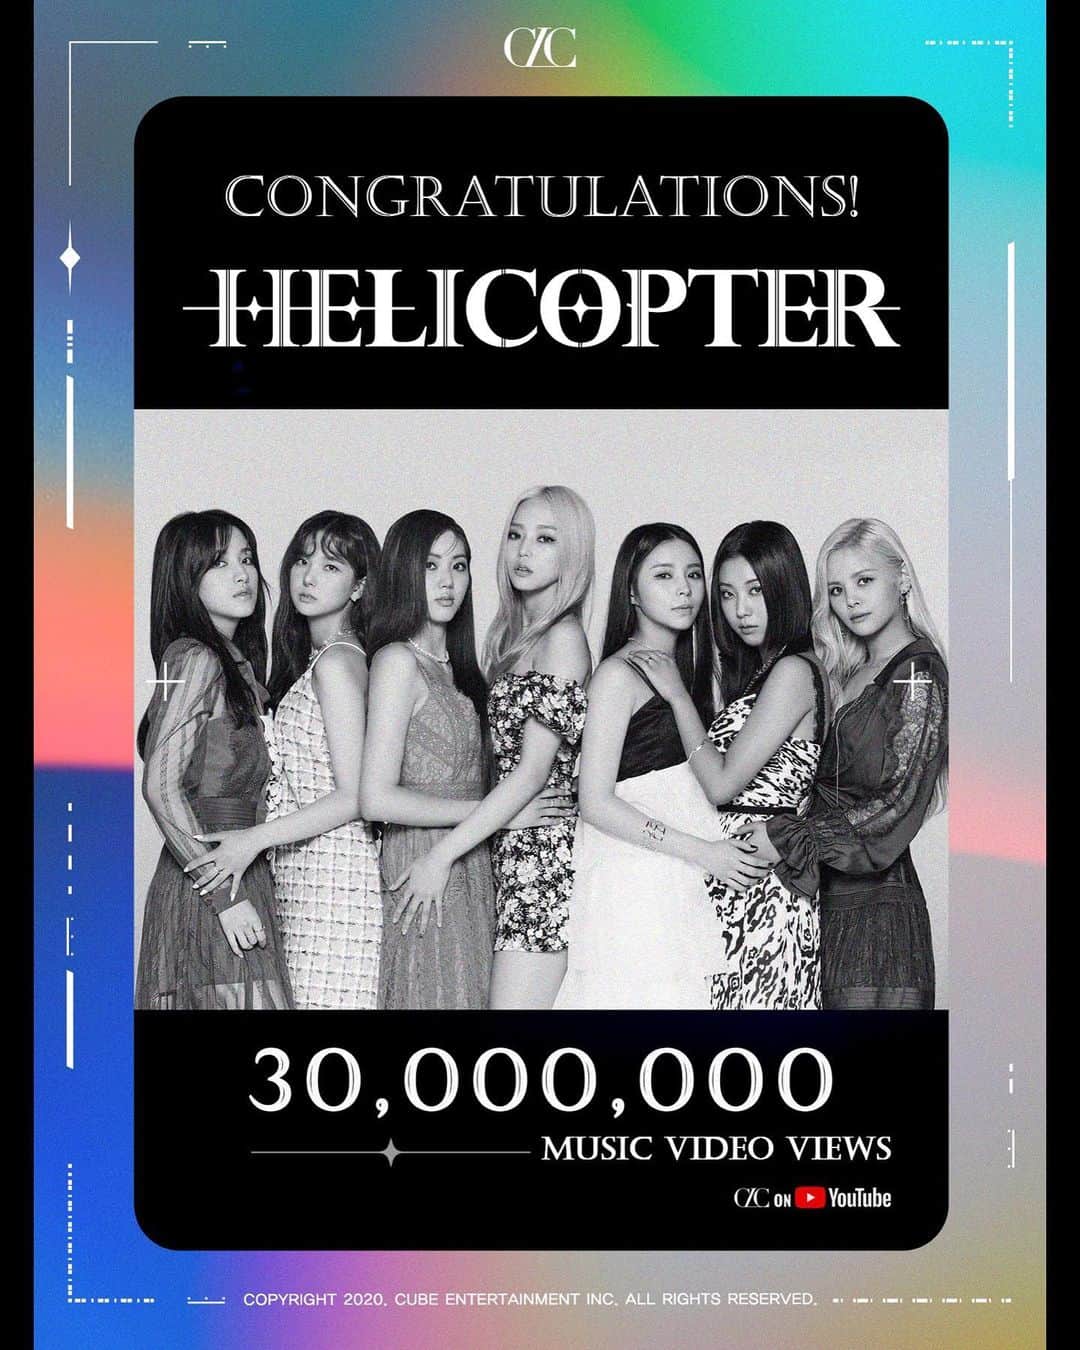 CLCのインスタグラム：「🎉 '#HELICOPTER' Official M/V HITS 30,000,000 VIEWS! 🎉 CONGRATULATIONS! CHESHIRE♥️ - #CLC_HELICOPTER Official M/V Link in bio - #CLC #씨엘씨 #헬리콥터」